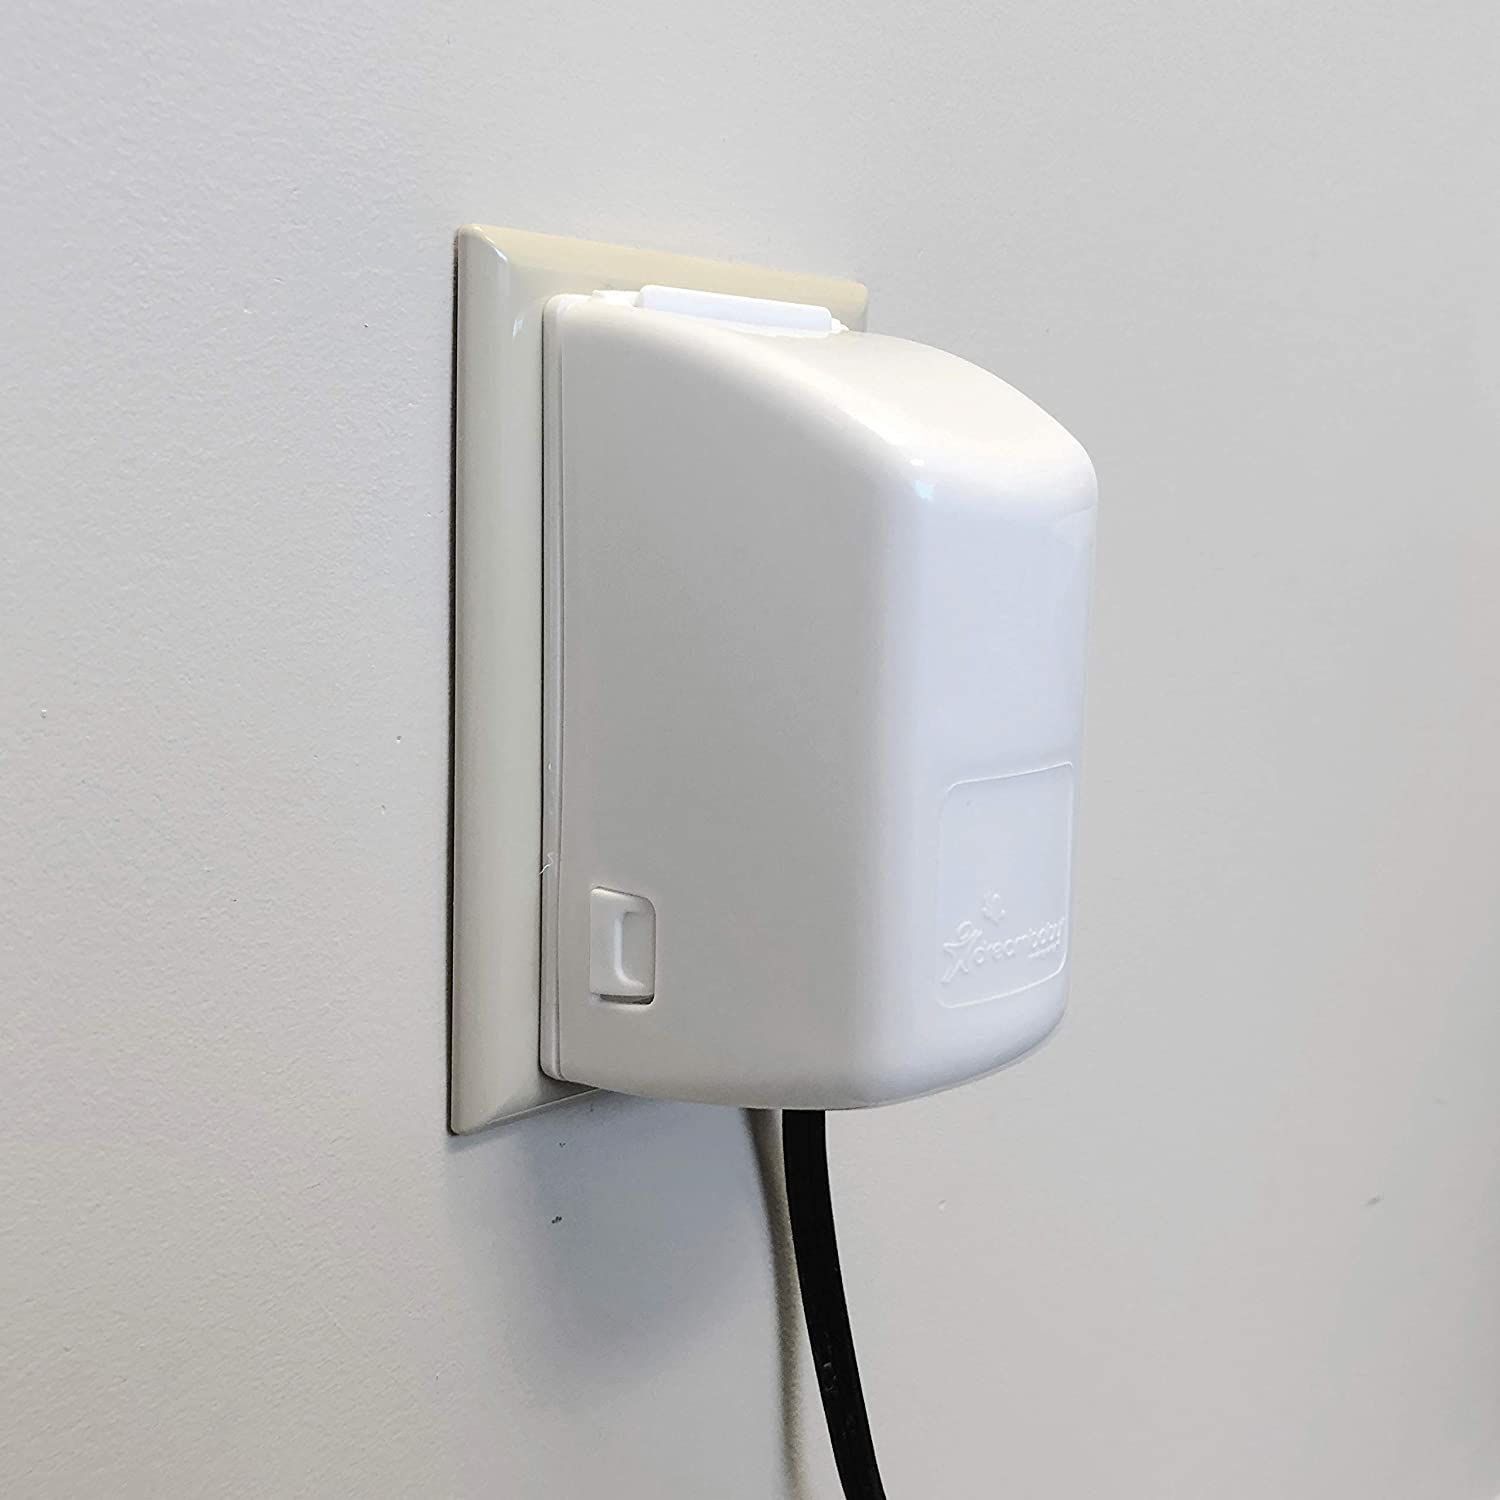 Dreambaby Outlet Plug Cover